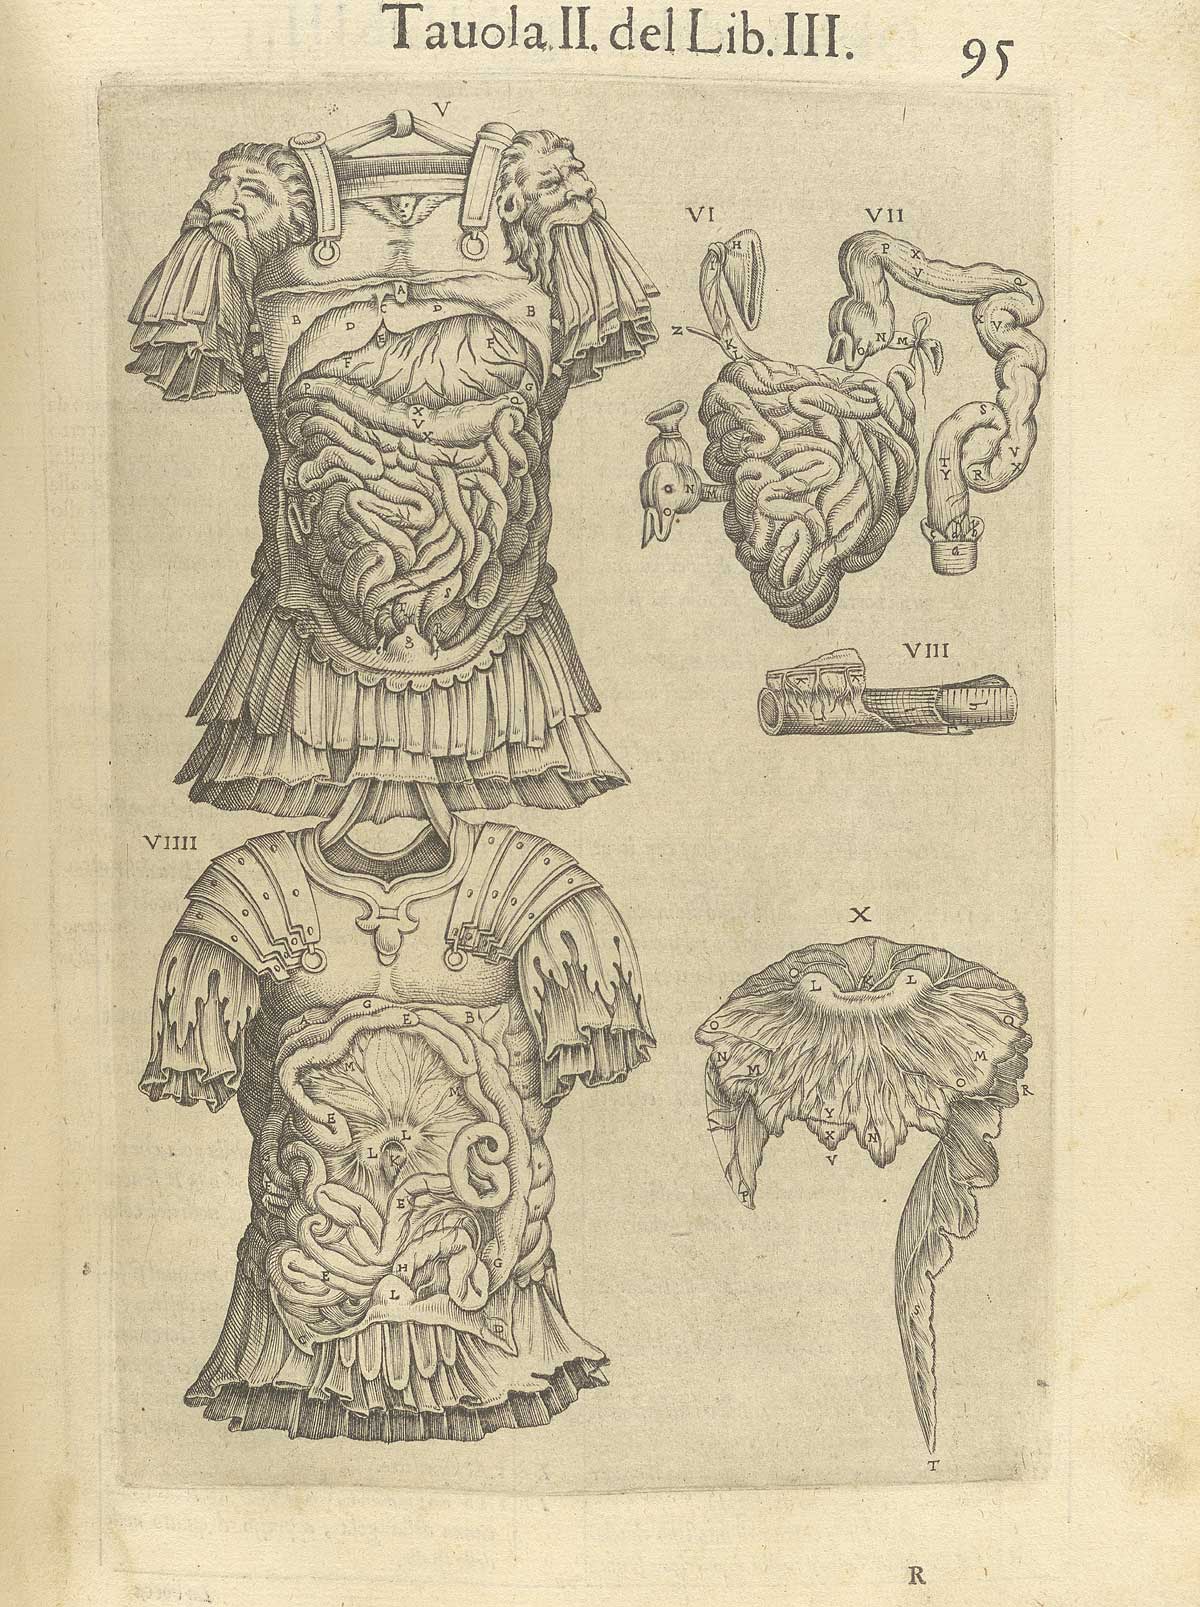 Page 95 of Juan Valverde de Amusco's Anatomia del corpo humano, featuring two upper bodies in armor displaying digestive systems under the muscles of the abdomen.